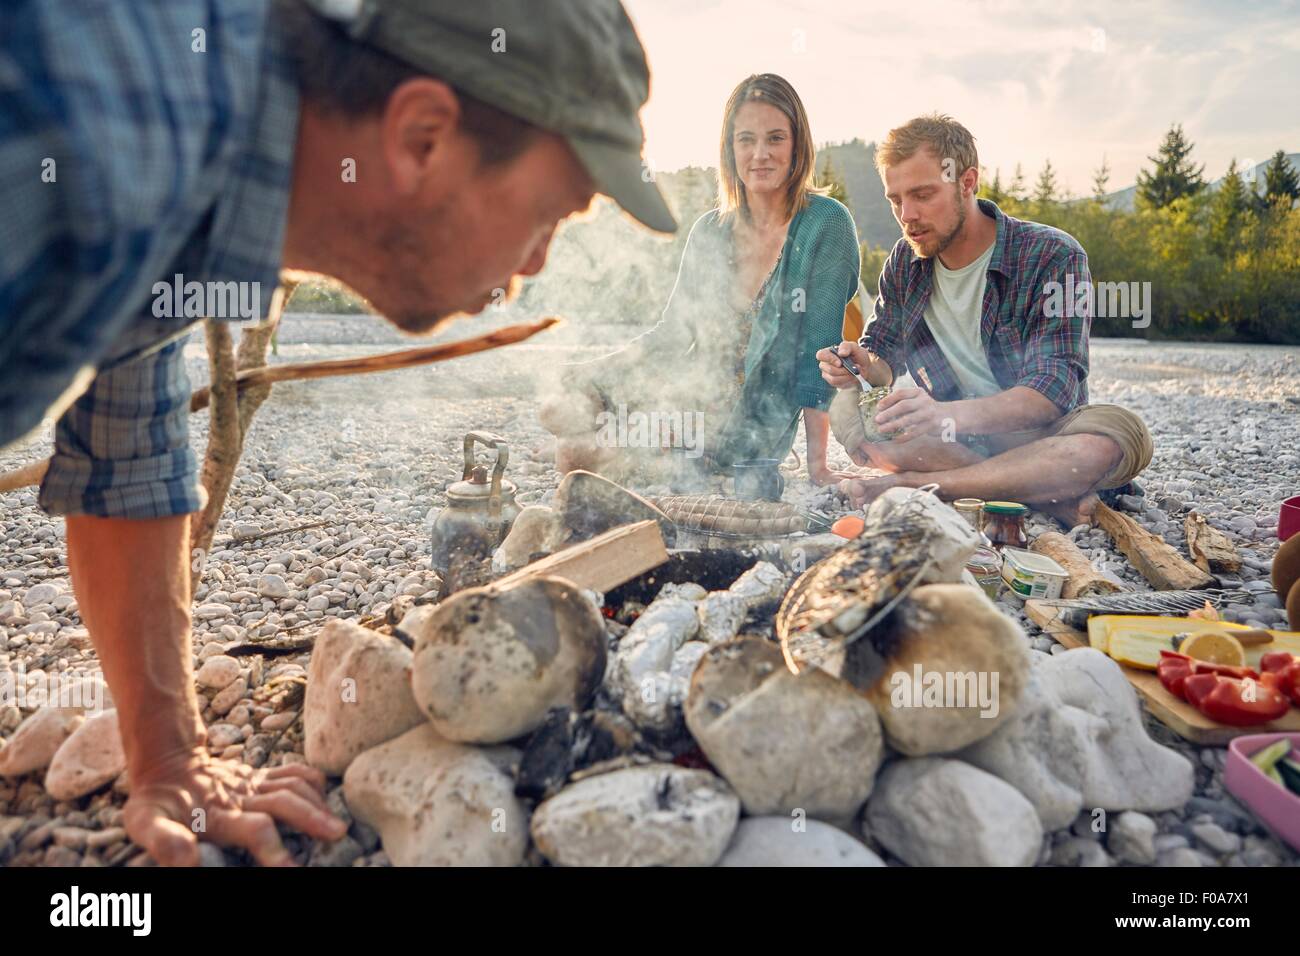 Adults sitting around campfire preparing food and blowing on embers Stock Photo